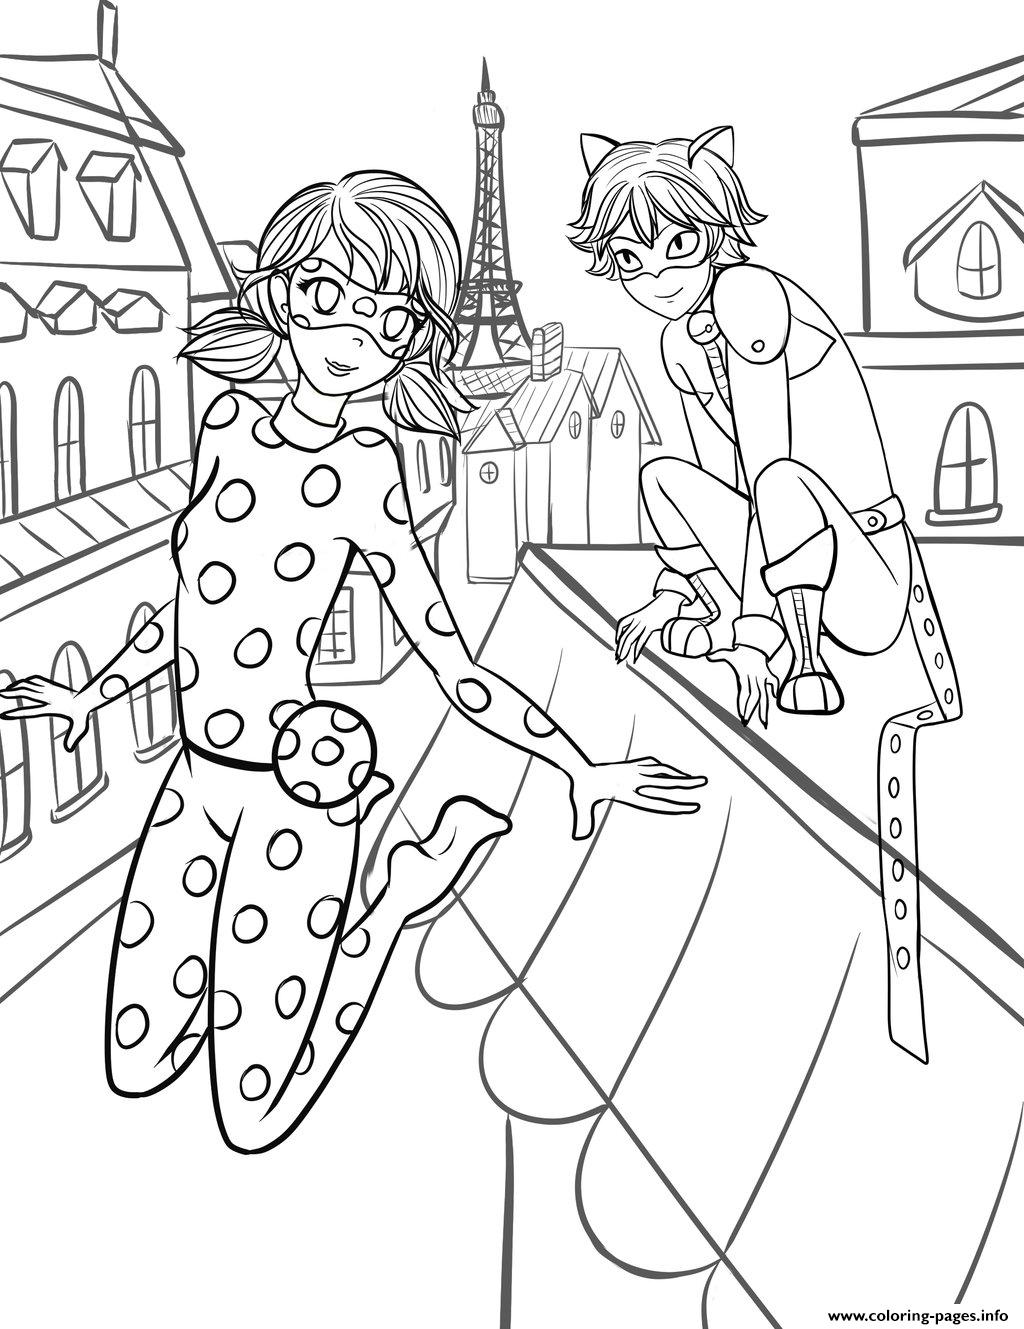 Miraculous Ladybug By Stella1999 Coloring Page Printable